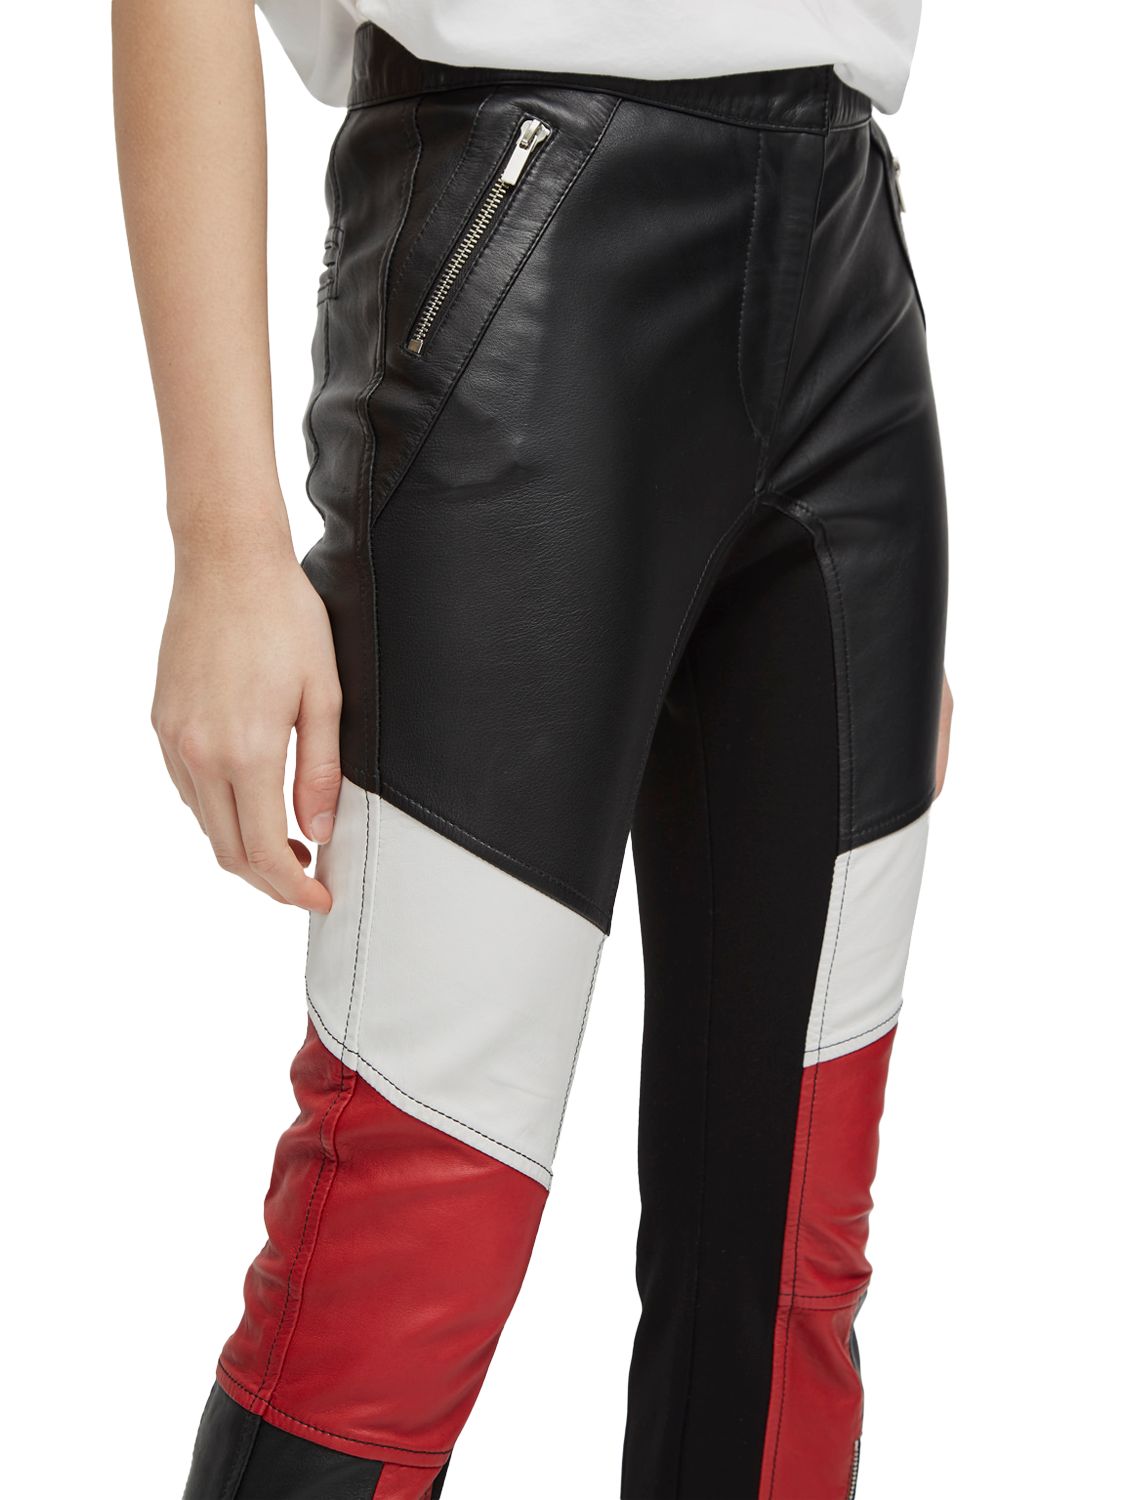 black and white leather pants